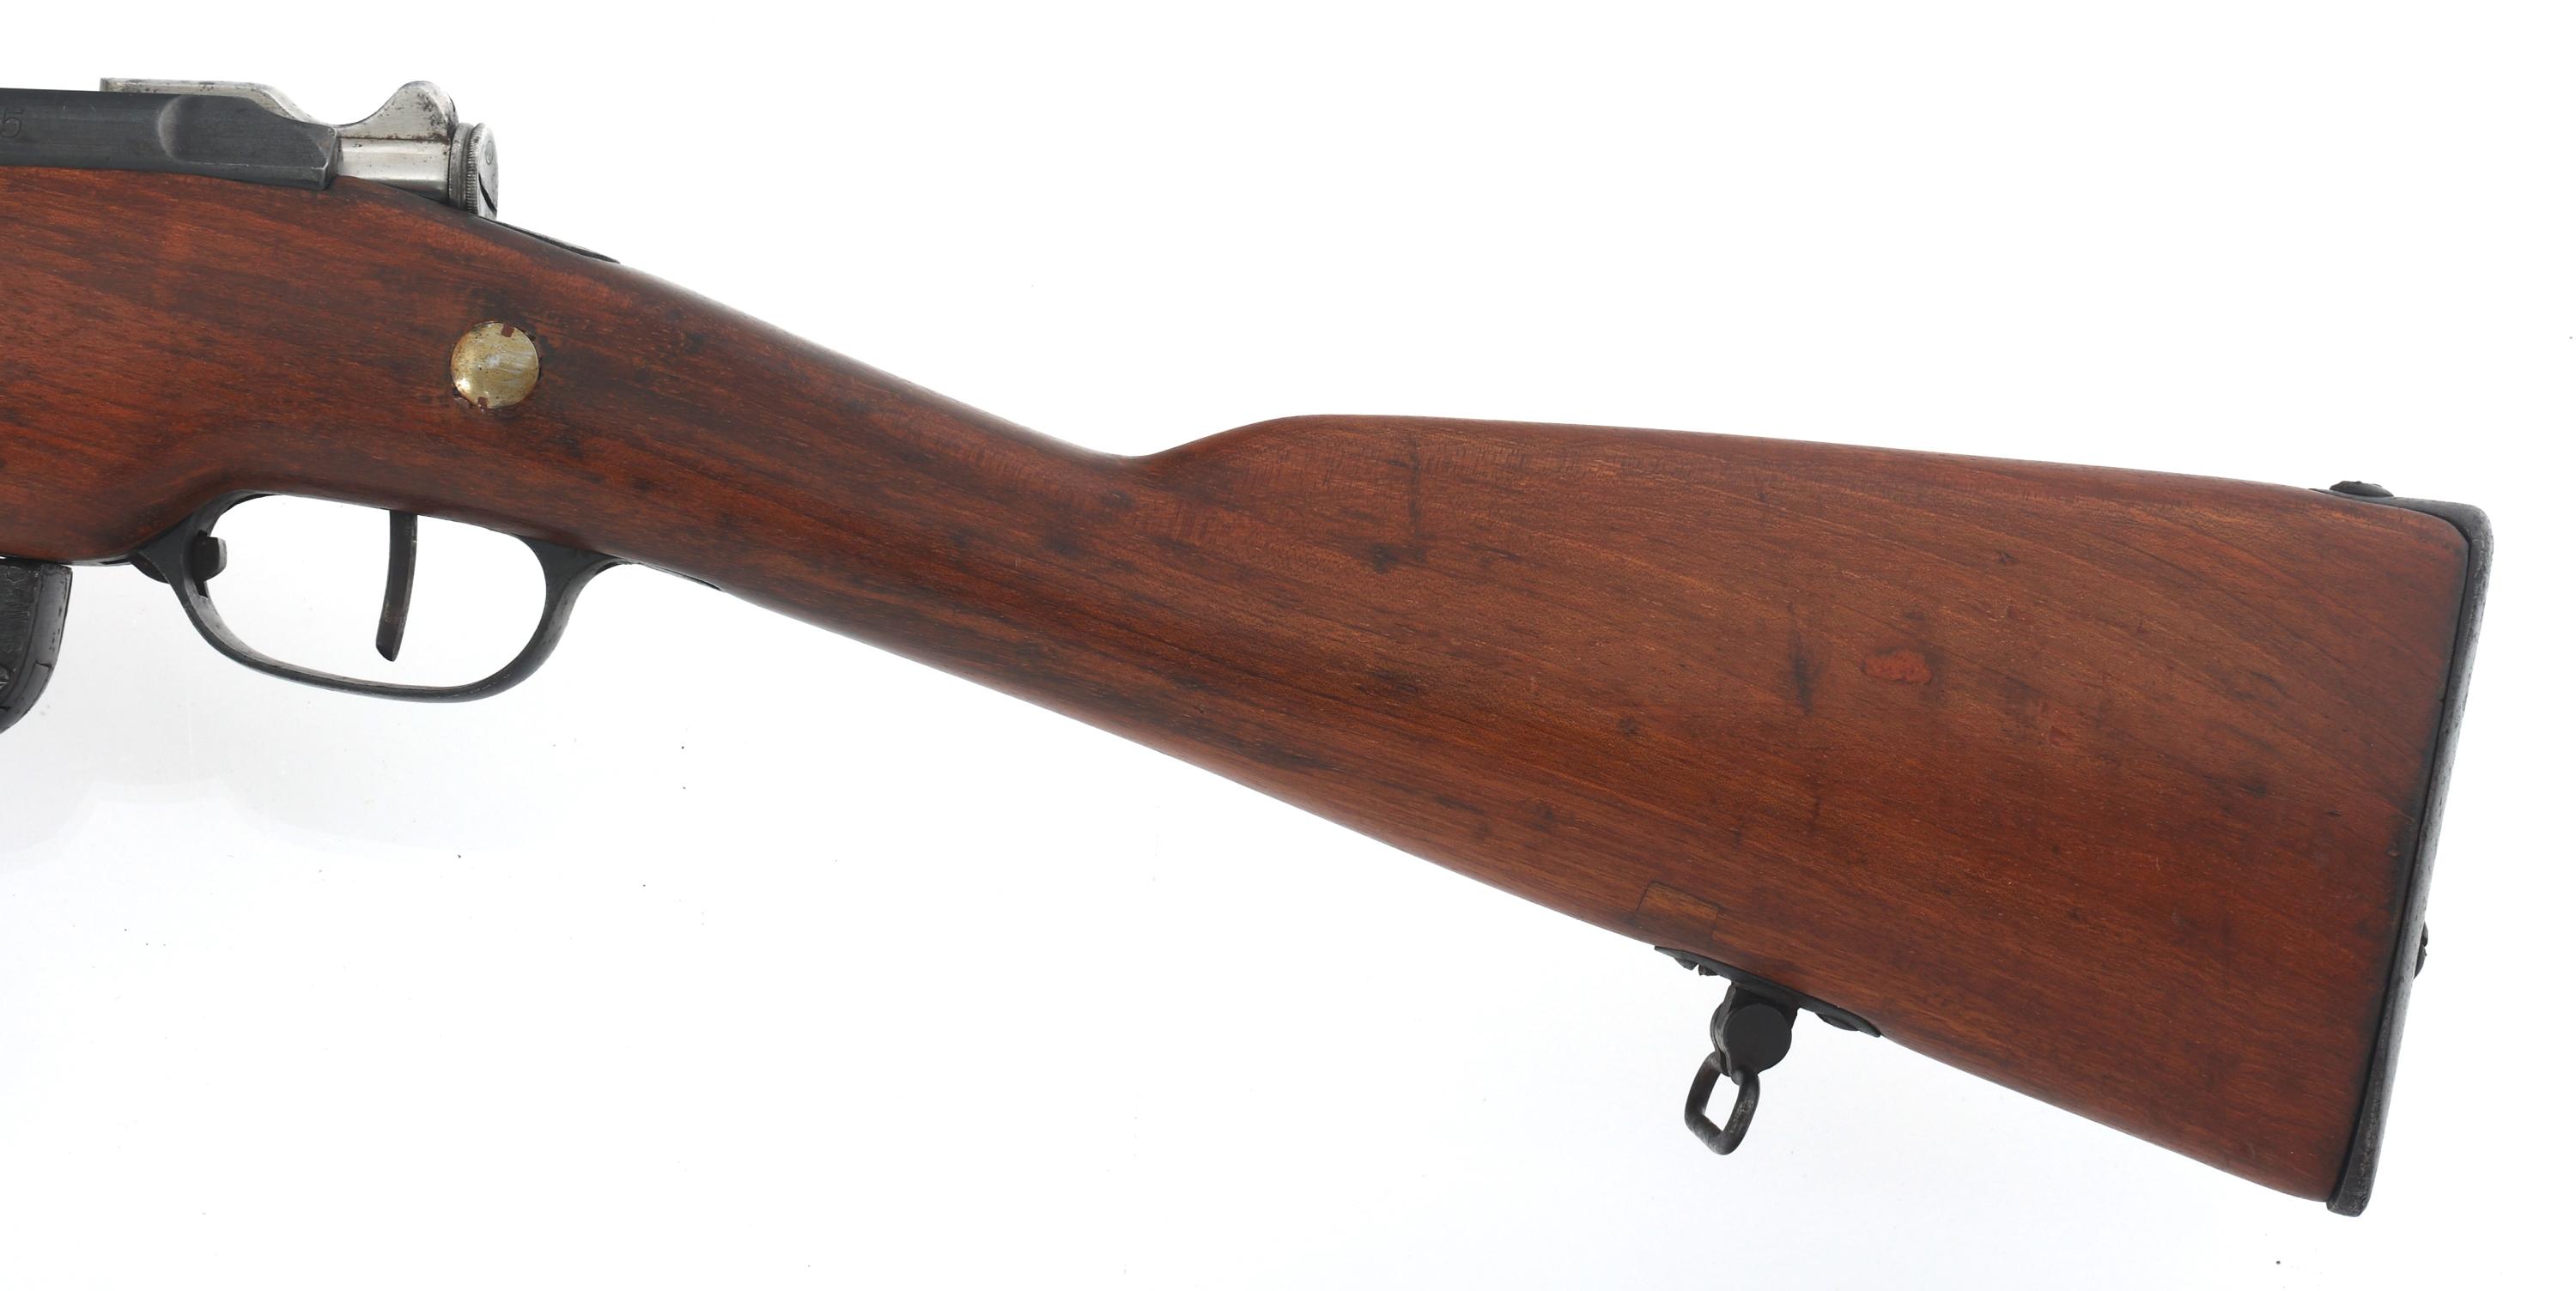 FRENCH ST ETIENNE MODEL 1907/15 7.5x54mm CAL RIFLE